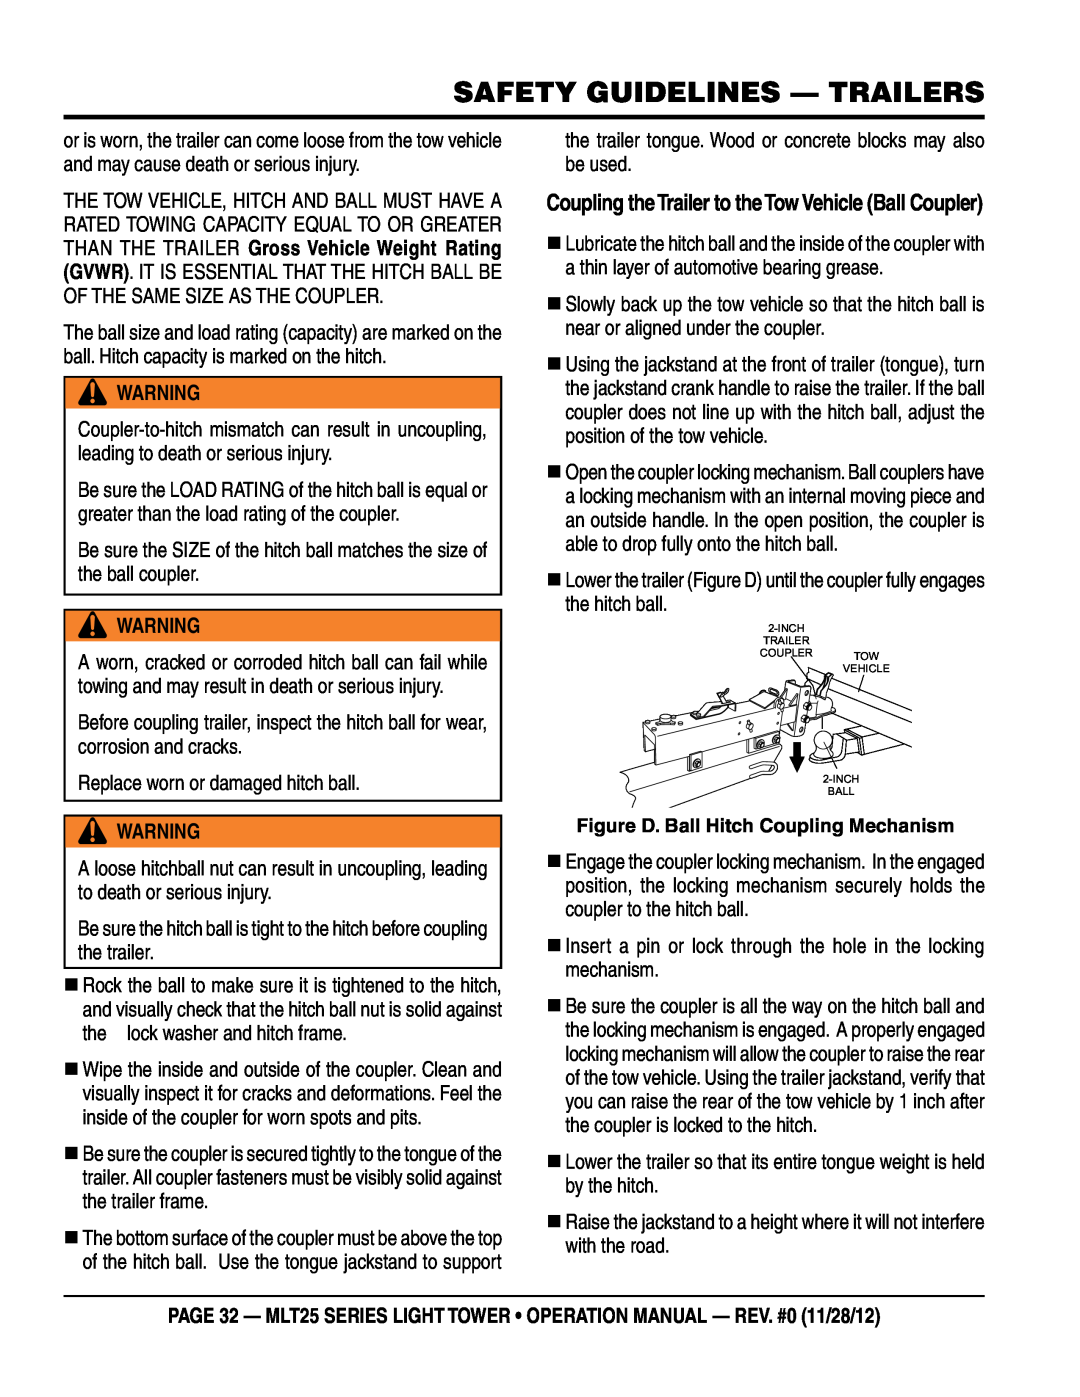 Multiquip MLT25 operation manual Coupling the Trailer to the Tow vehicle Ball Coupler, safety guidelines - TRAILERS 